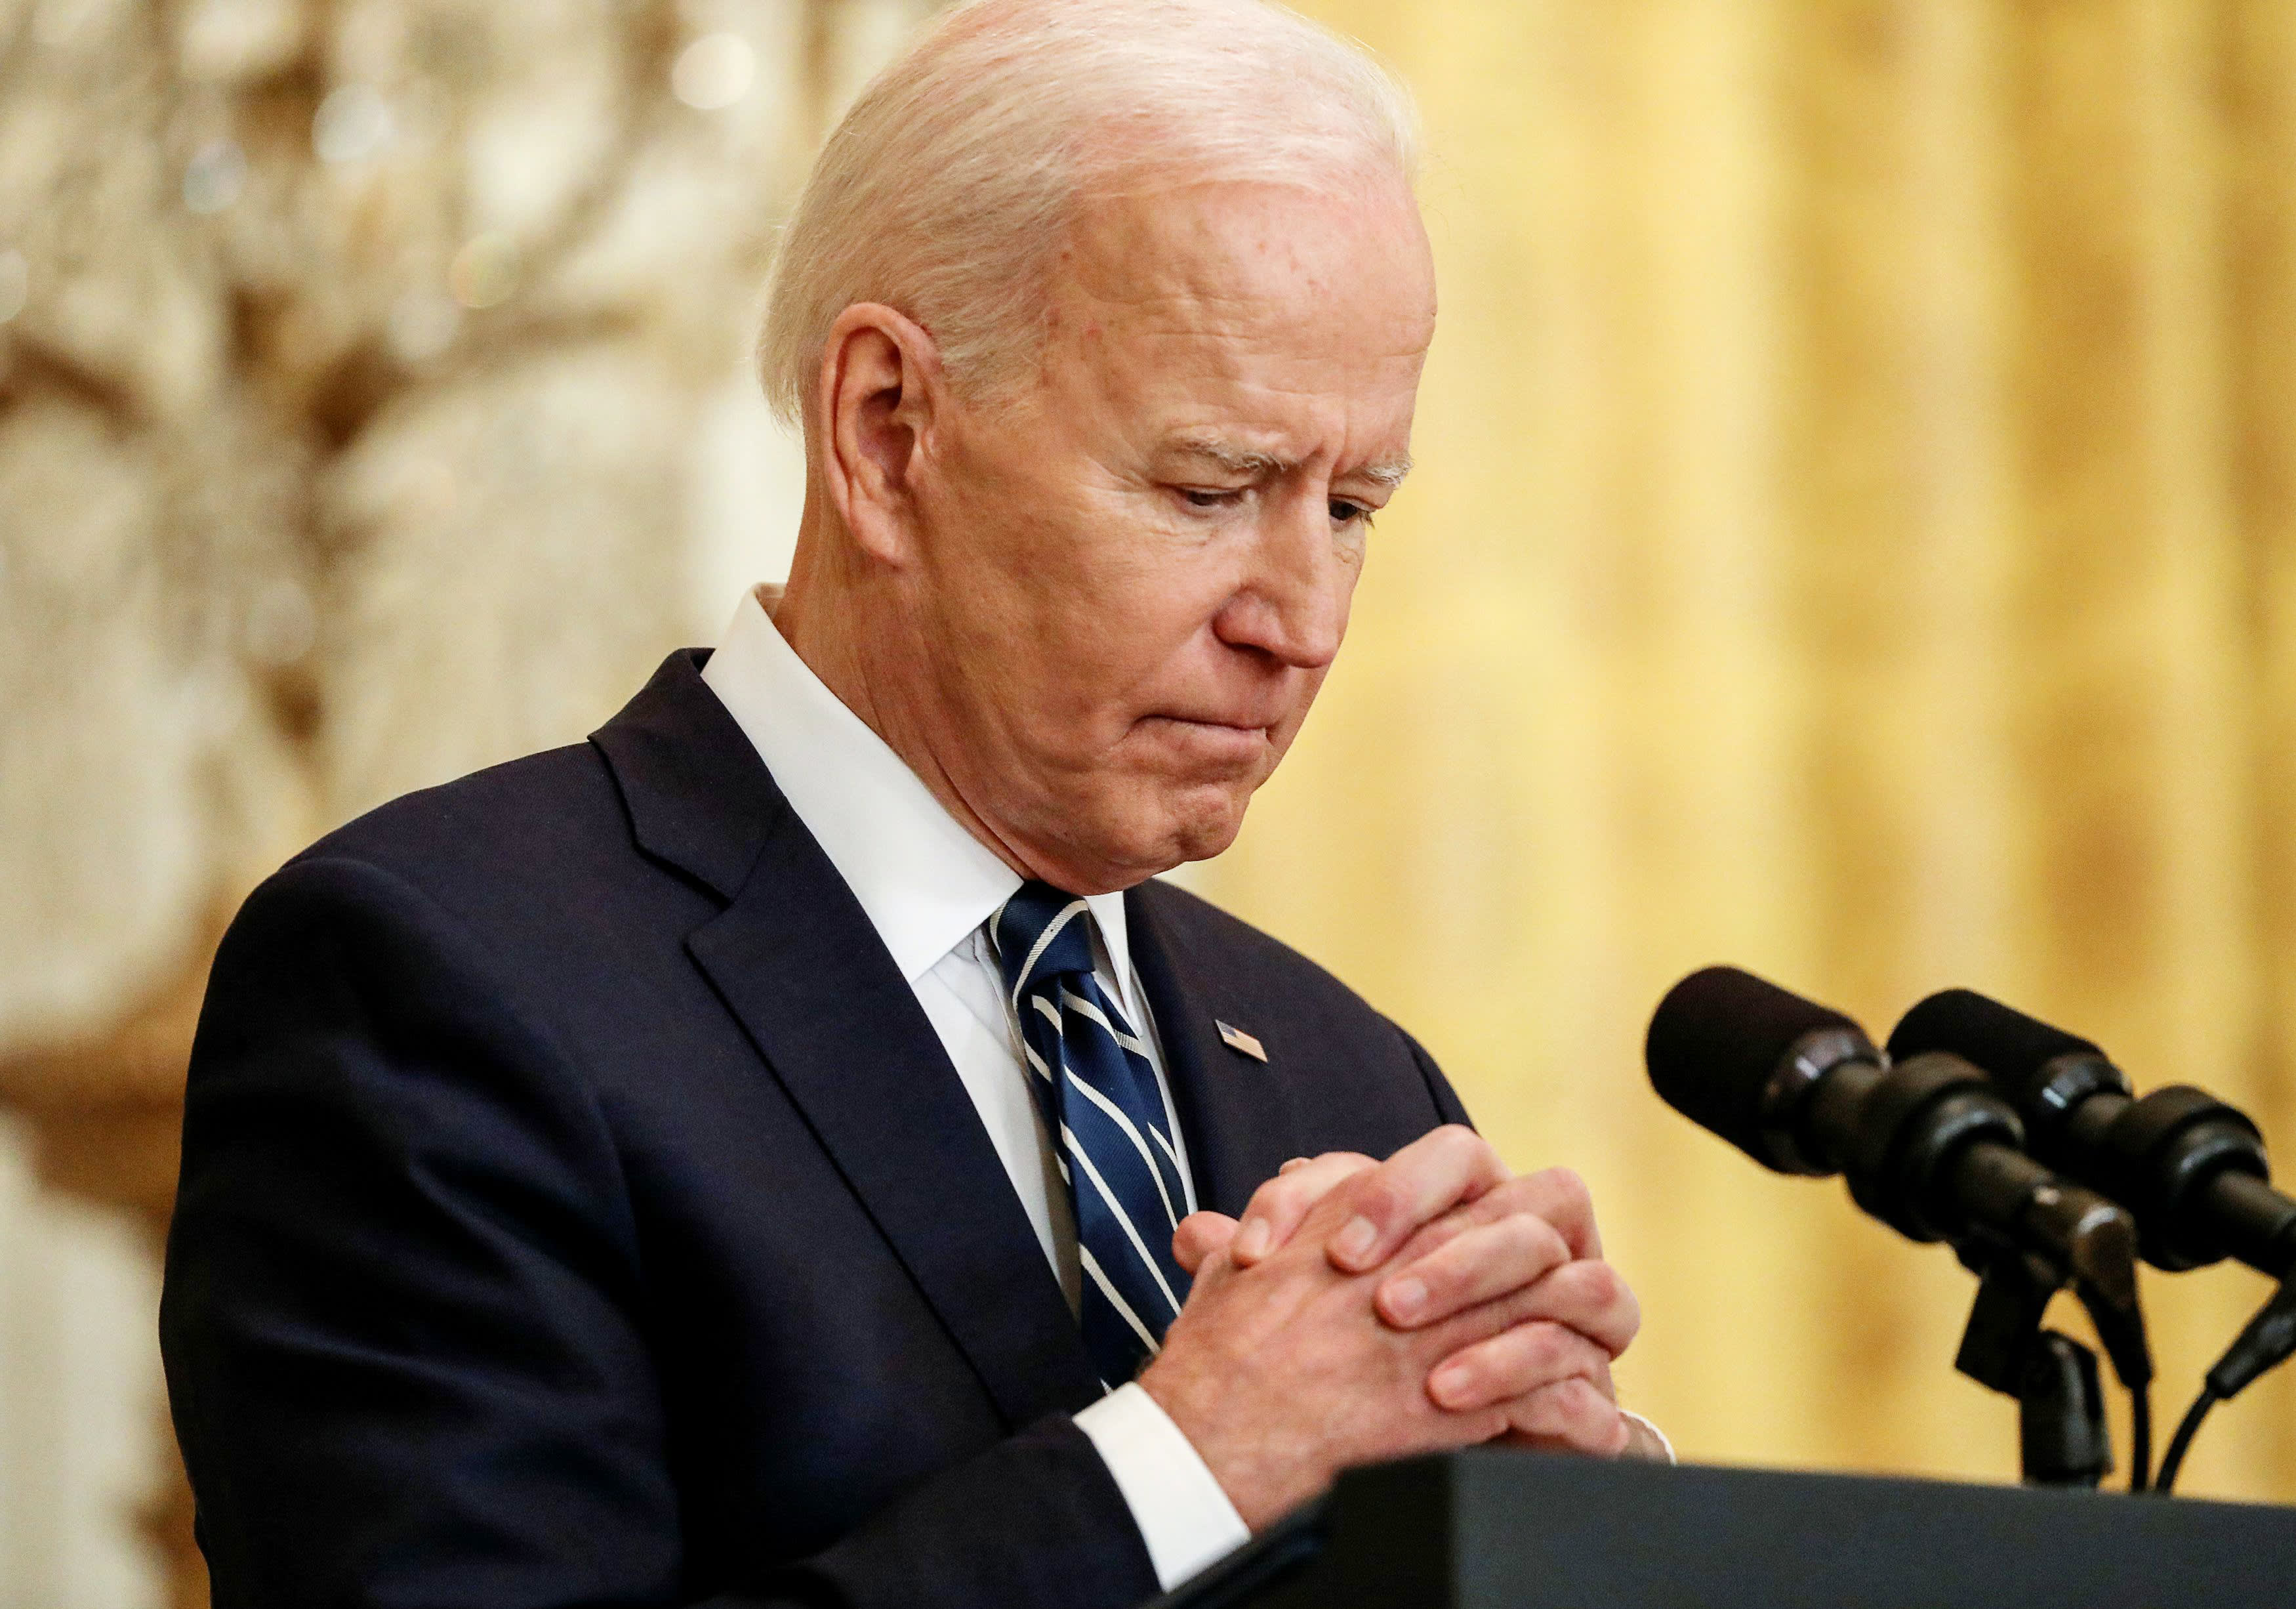 Biden vows to complete Afghanistan evacuation, hunt down ISIS leaders after Kabul attack